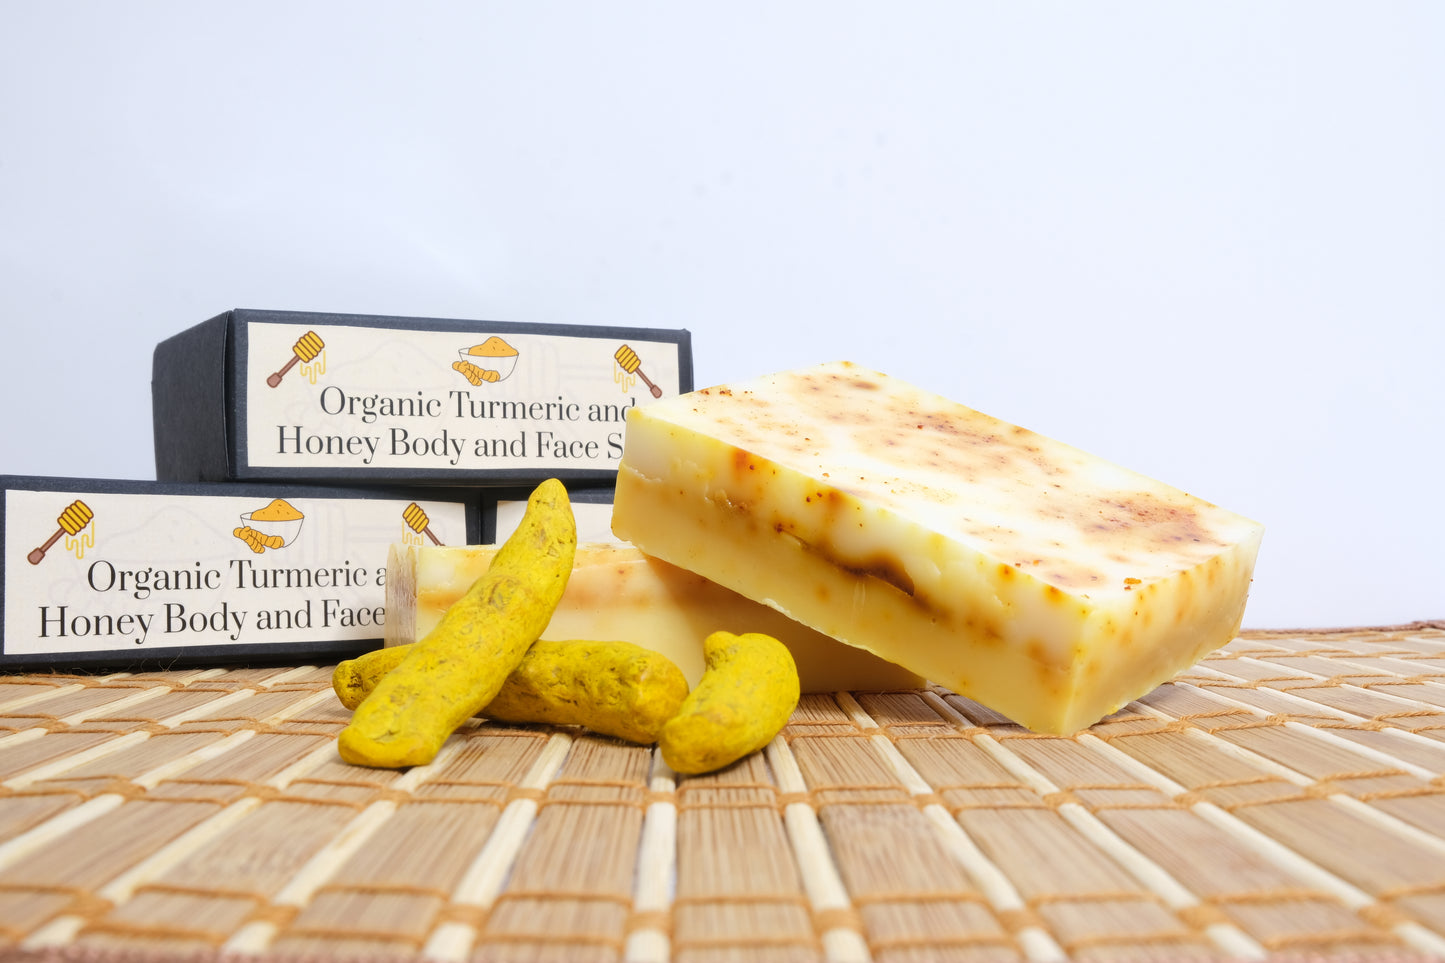 Organic Turmeric and Honey Body and Face Soap